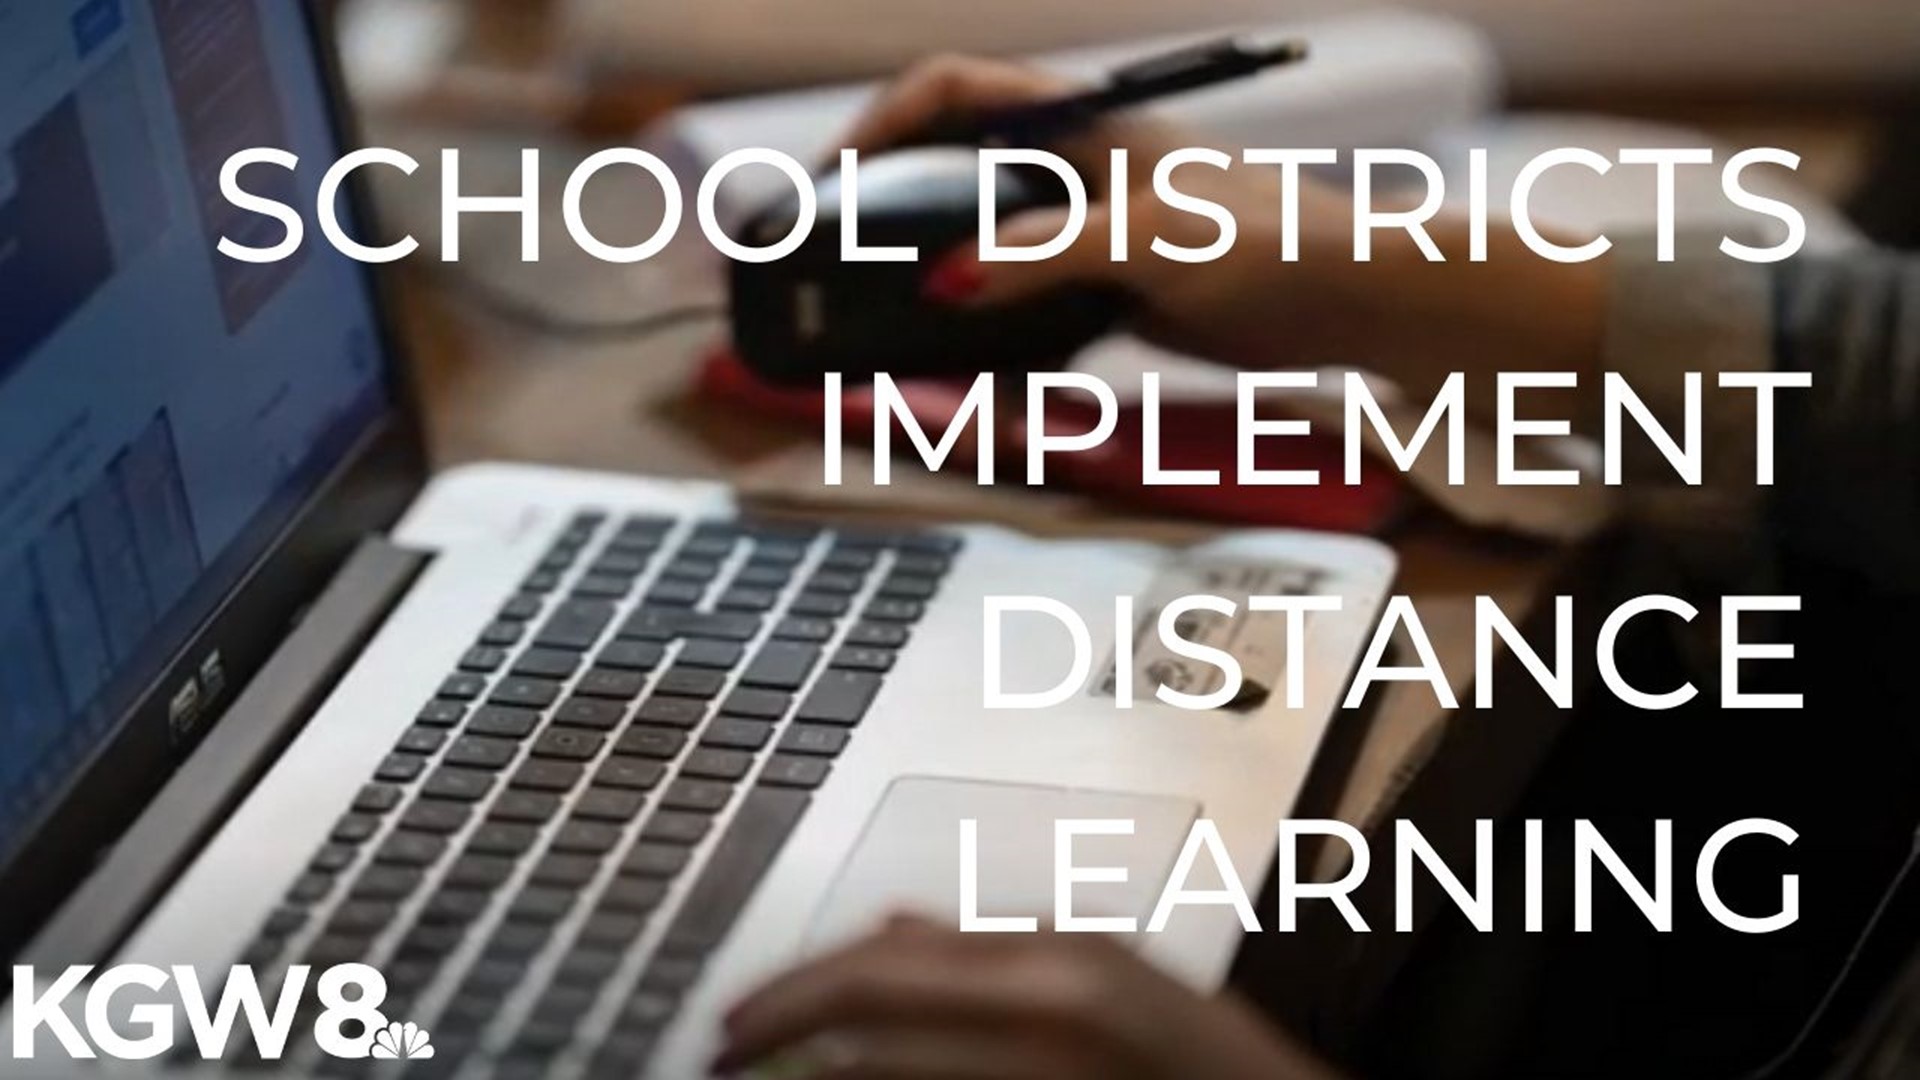 Learning from home. Here’s how school districts are implementing distance learning.